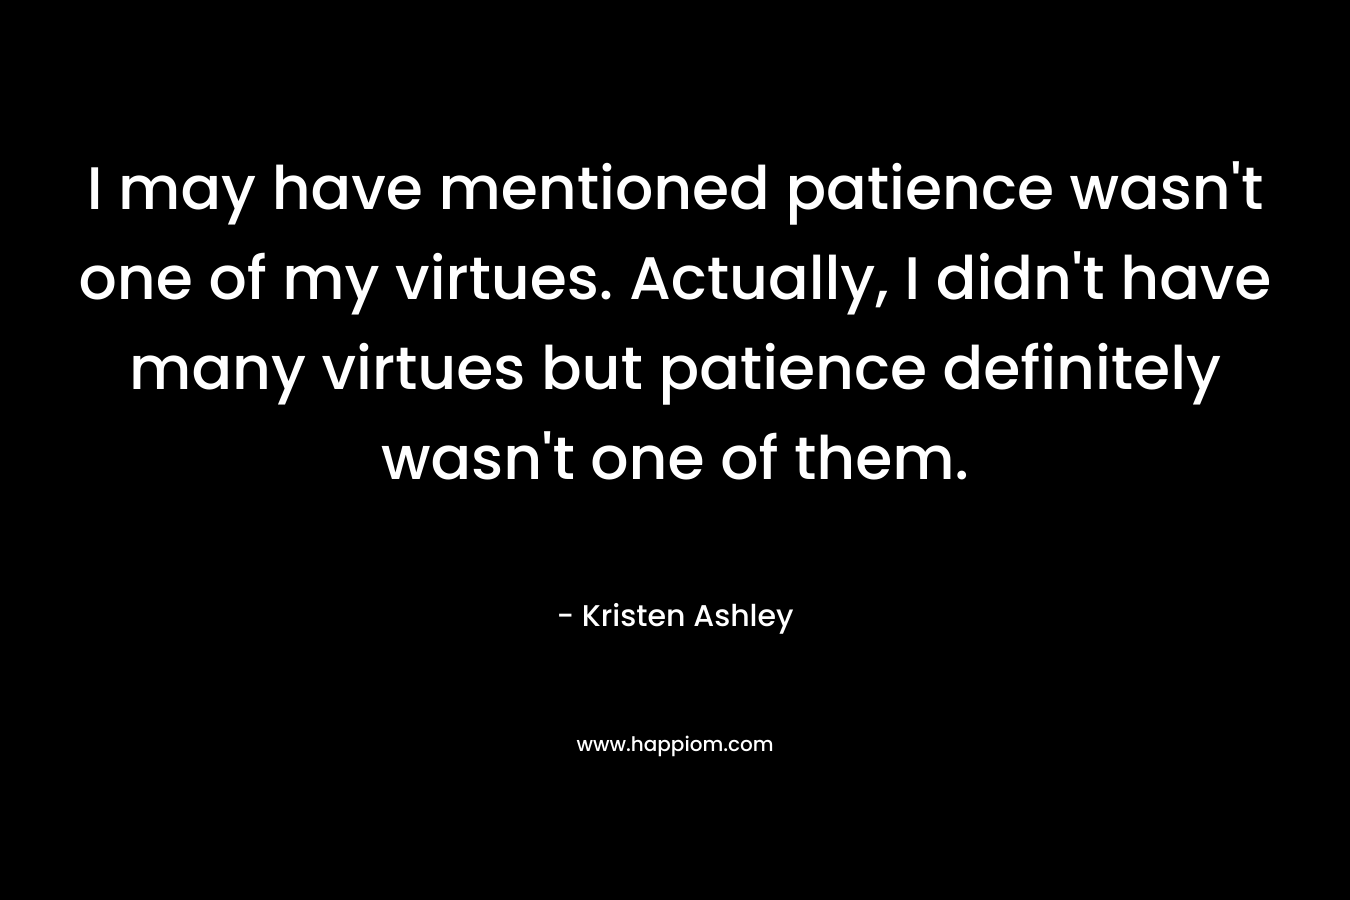 I may have mentioned patience wasn't one of my virtues. Actually, I didn't have many virtues but patience definitely wasn't one of them.